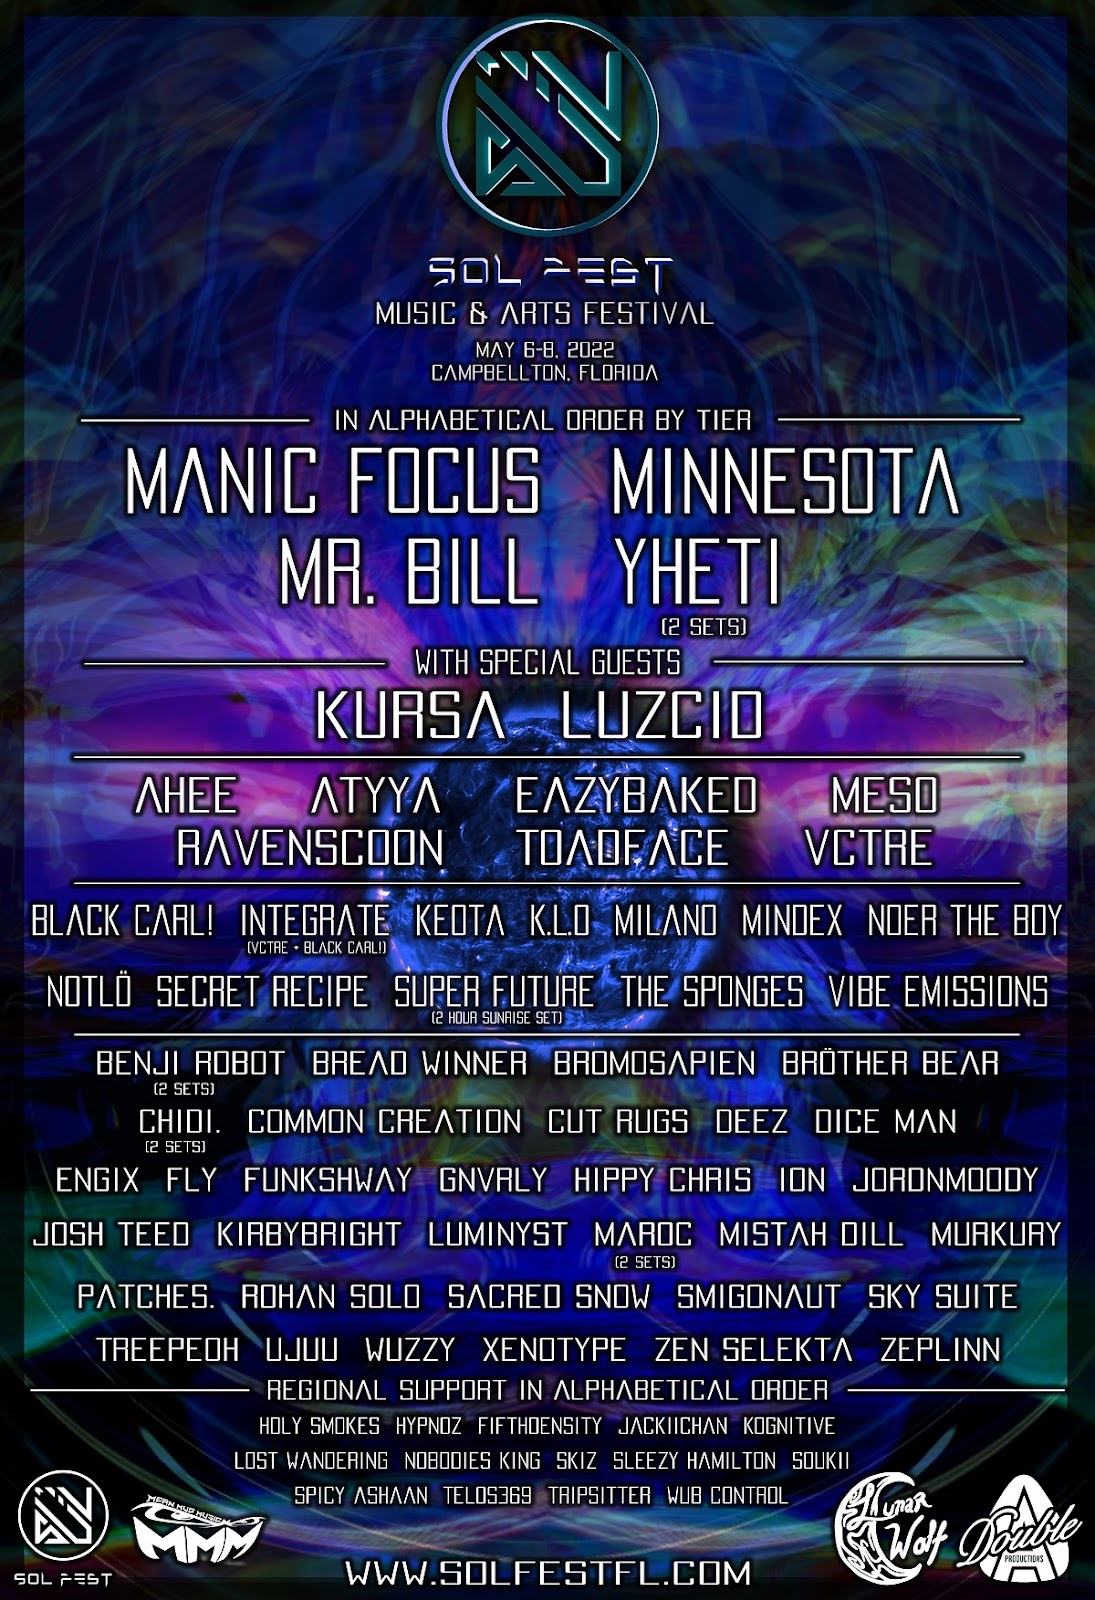 Sol Fest Music & Arts Festival Lineup music-festival and rave-2022